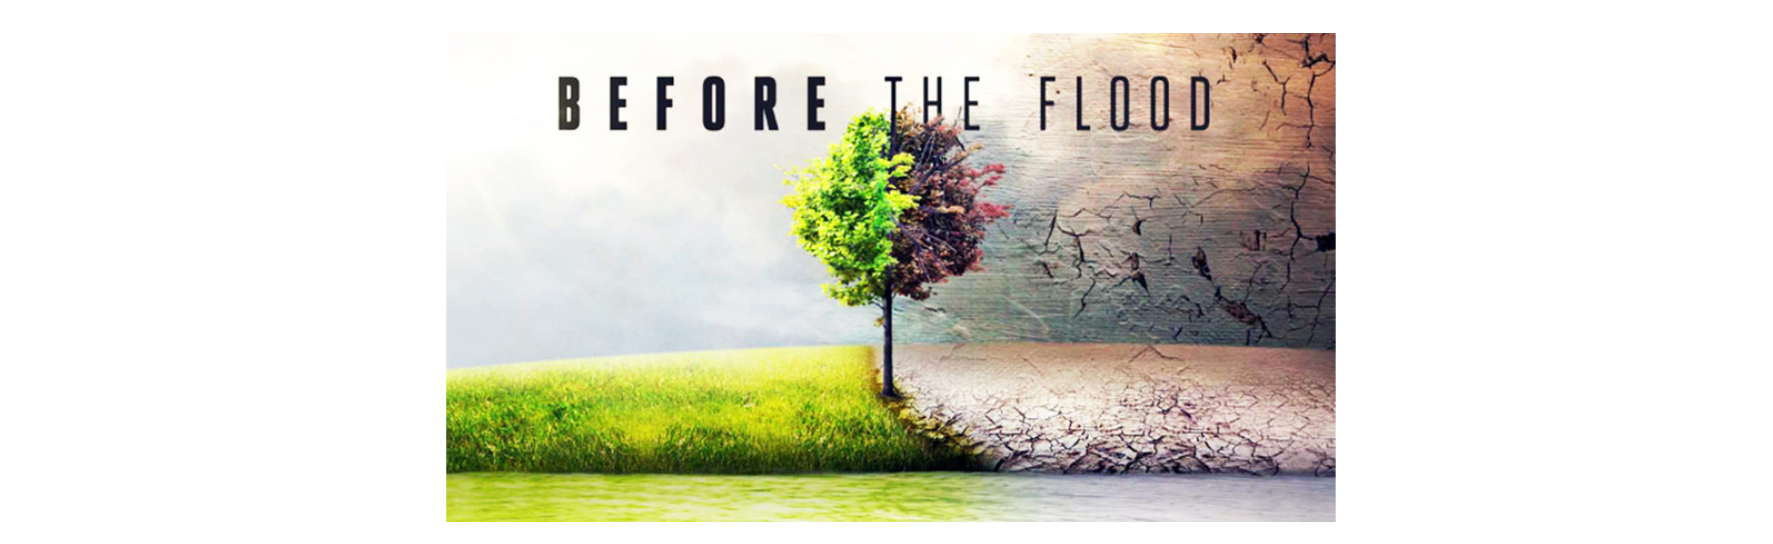 before the flood cover